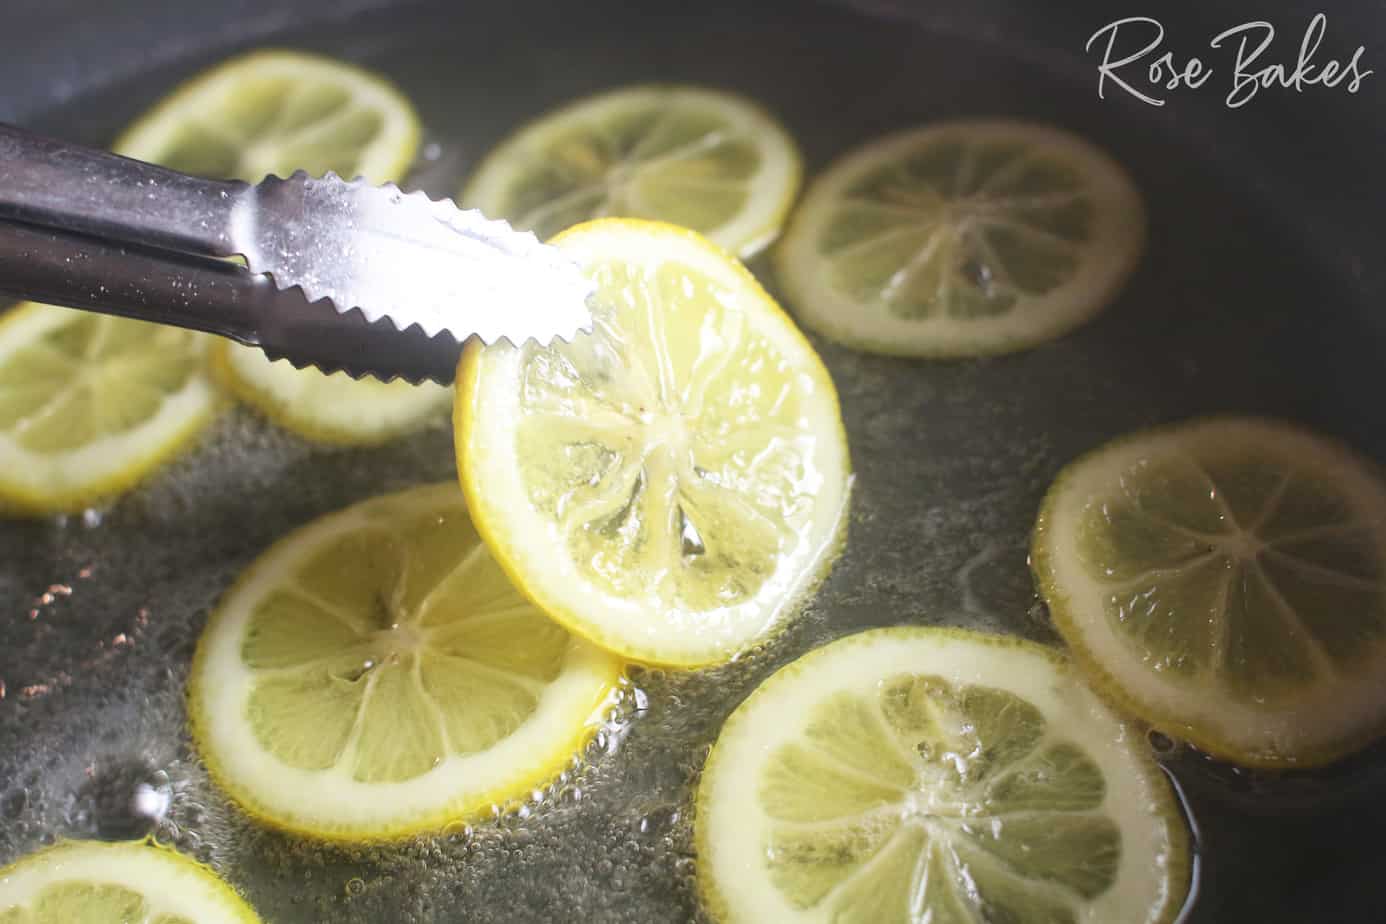 tongs flipping lemon slices in a shallow pan of sugar water that is boiling